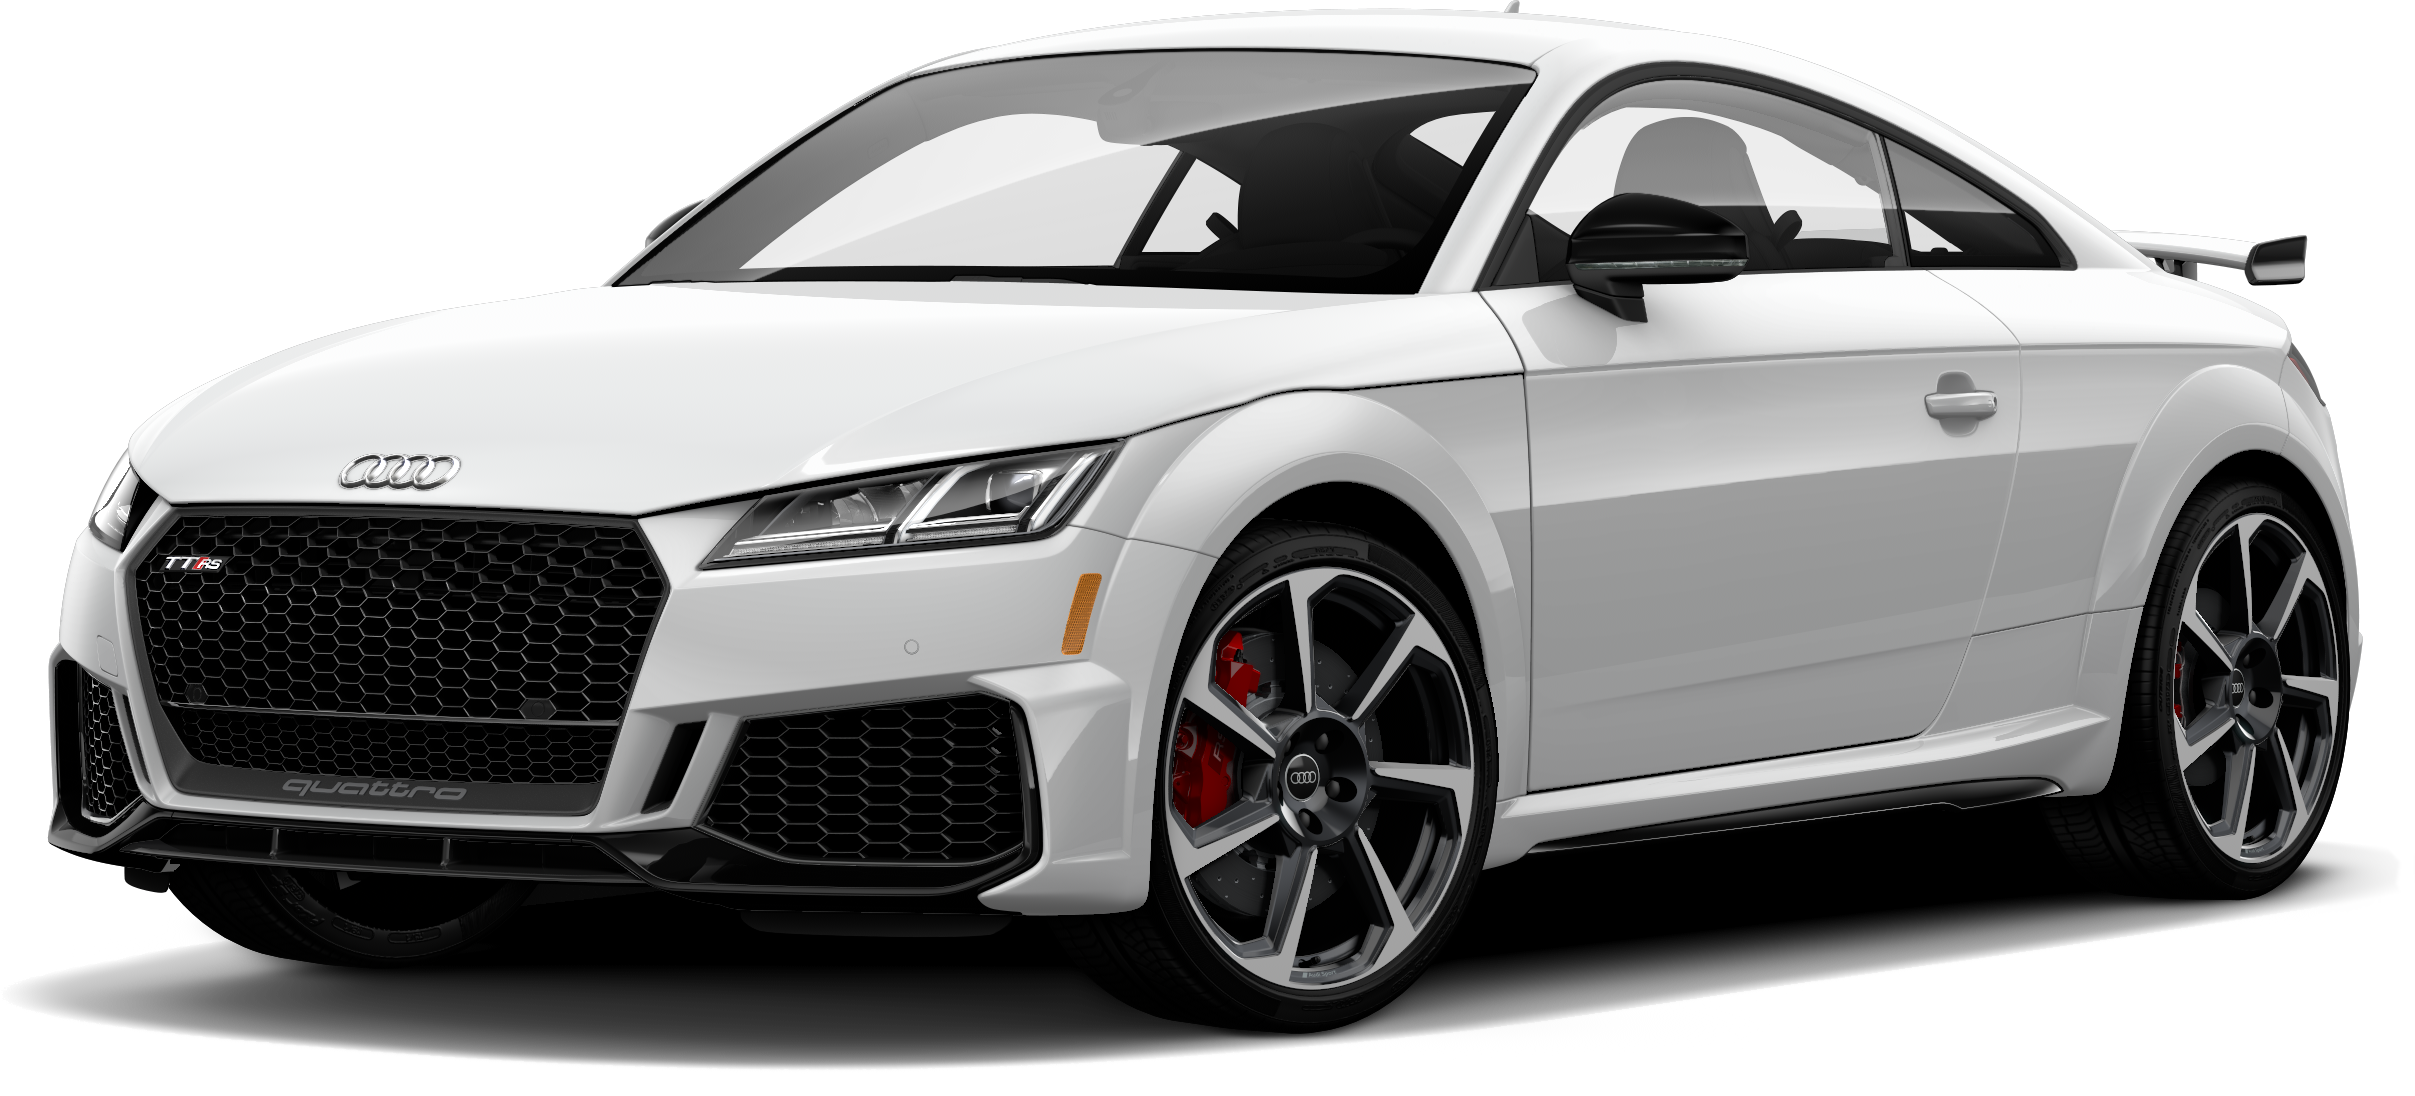 2021 Audi TT RS Incentives, Specials & Offers in Los Angeles CA